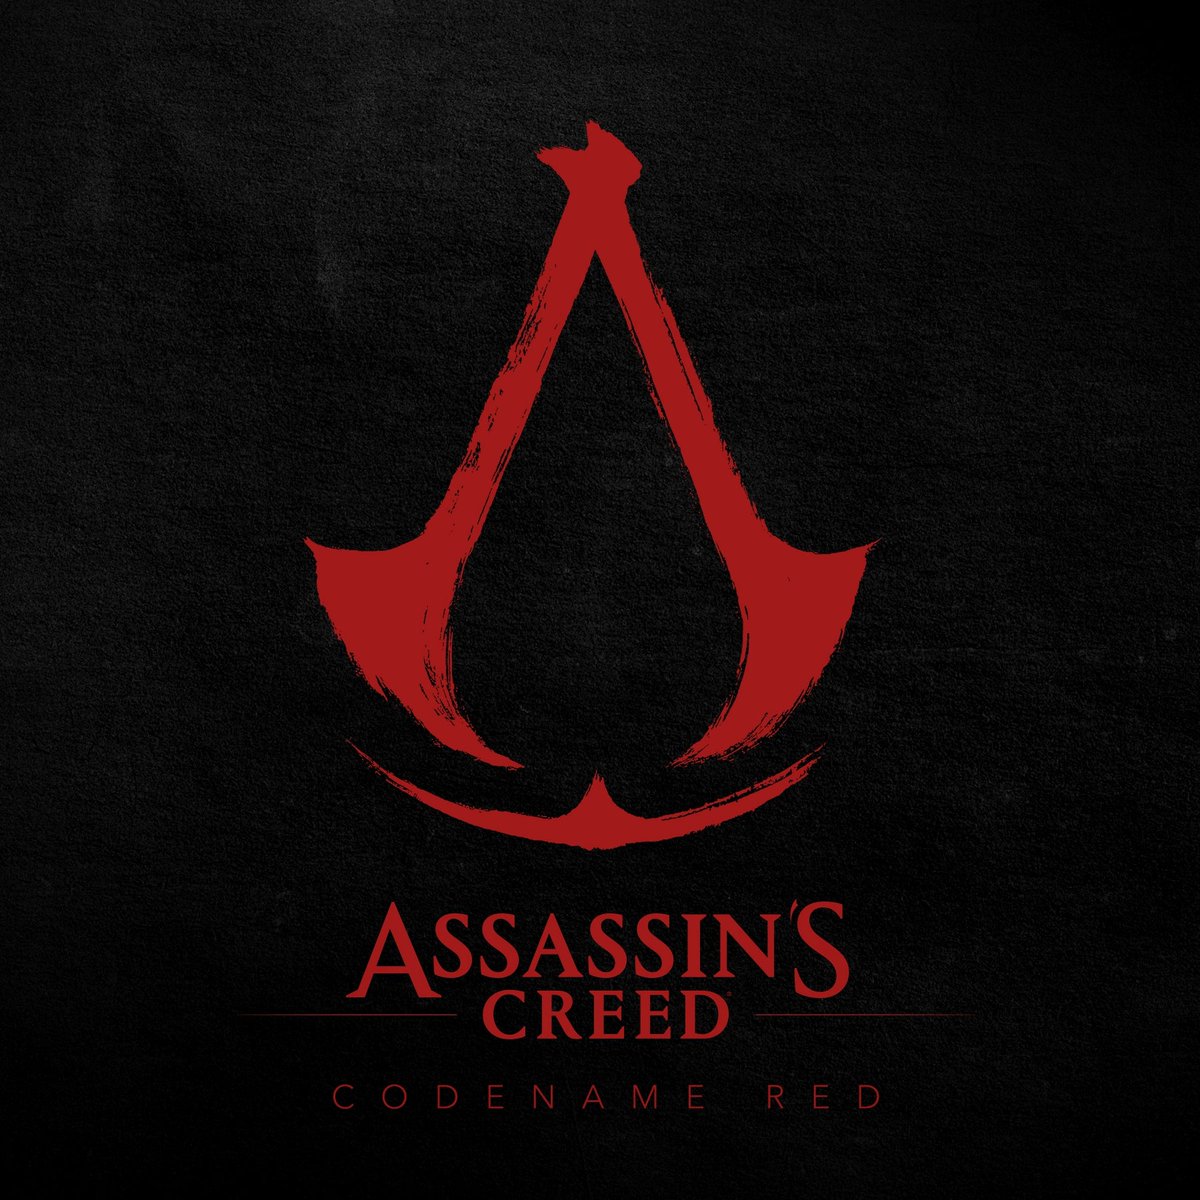 t.ly/qTBCR 📌

A live countdown timer when Assassin's Creed Codenamed Red will be revealed officially.
#assassinscreedred #assassinscreed #assassinscreedshadows #Ubisoftforward